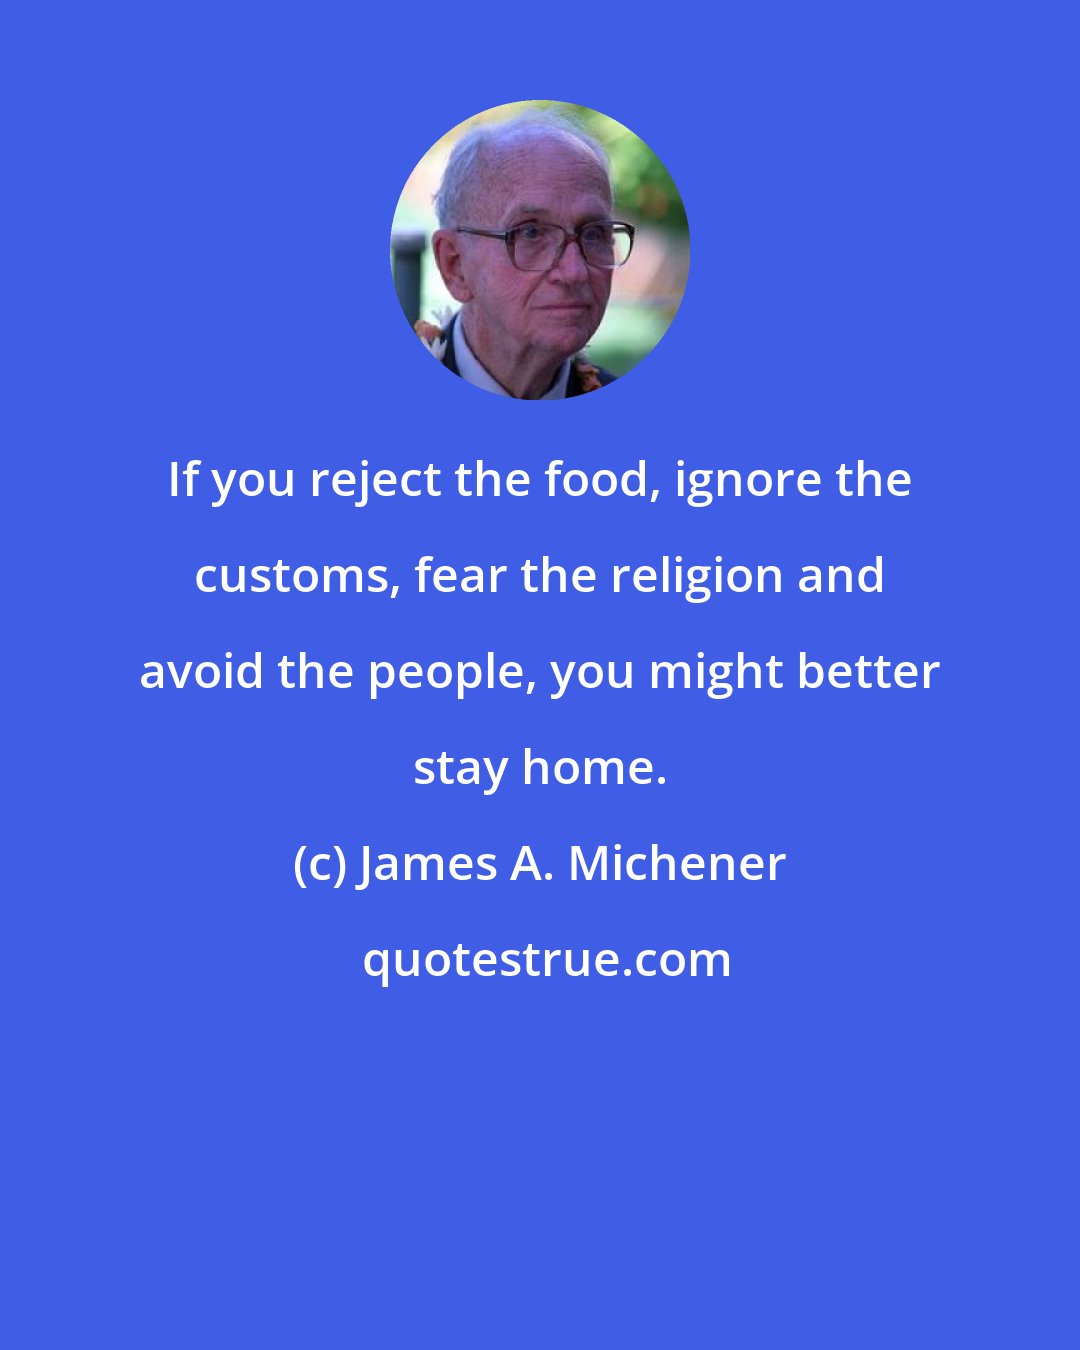 James A. Michener: If you reject the food, ignore the customs, fear the religion and avoid the people, you might better stay home.